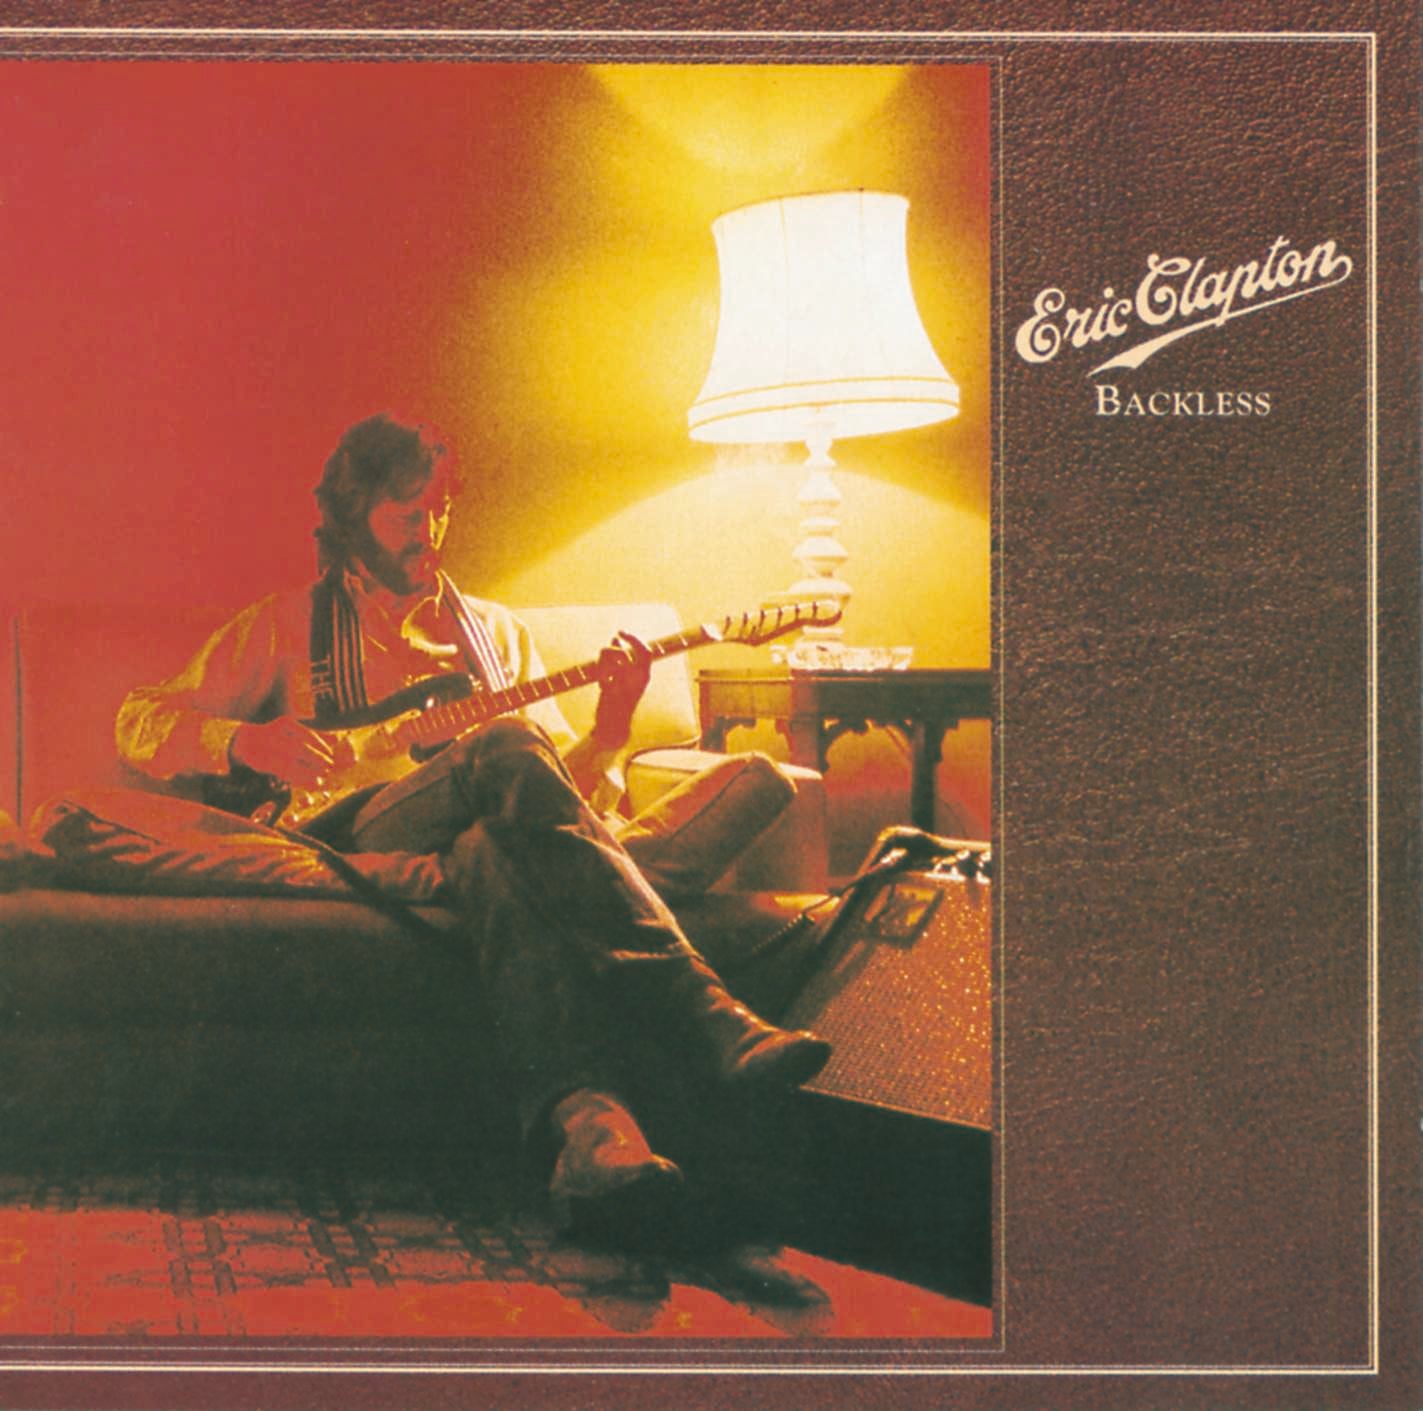 Backless - Eric Clapton 